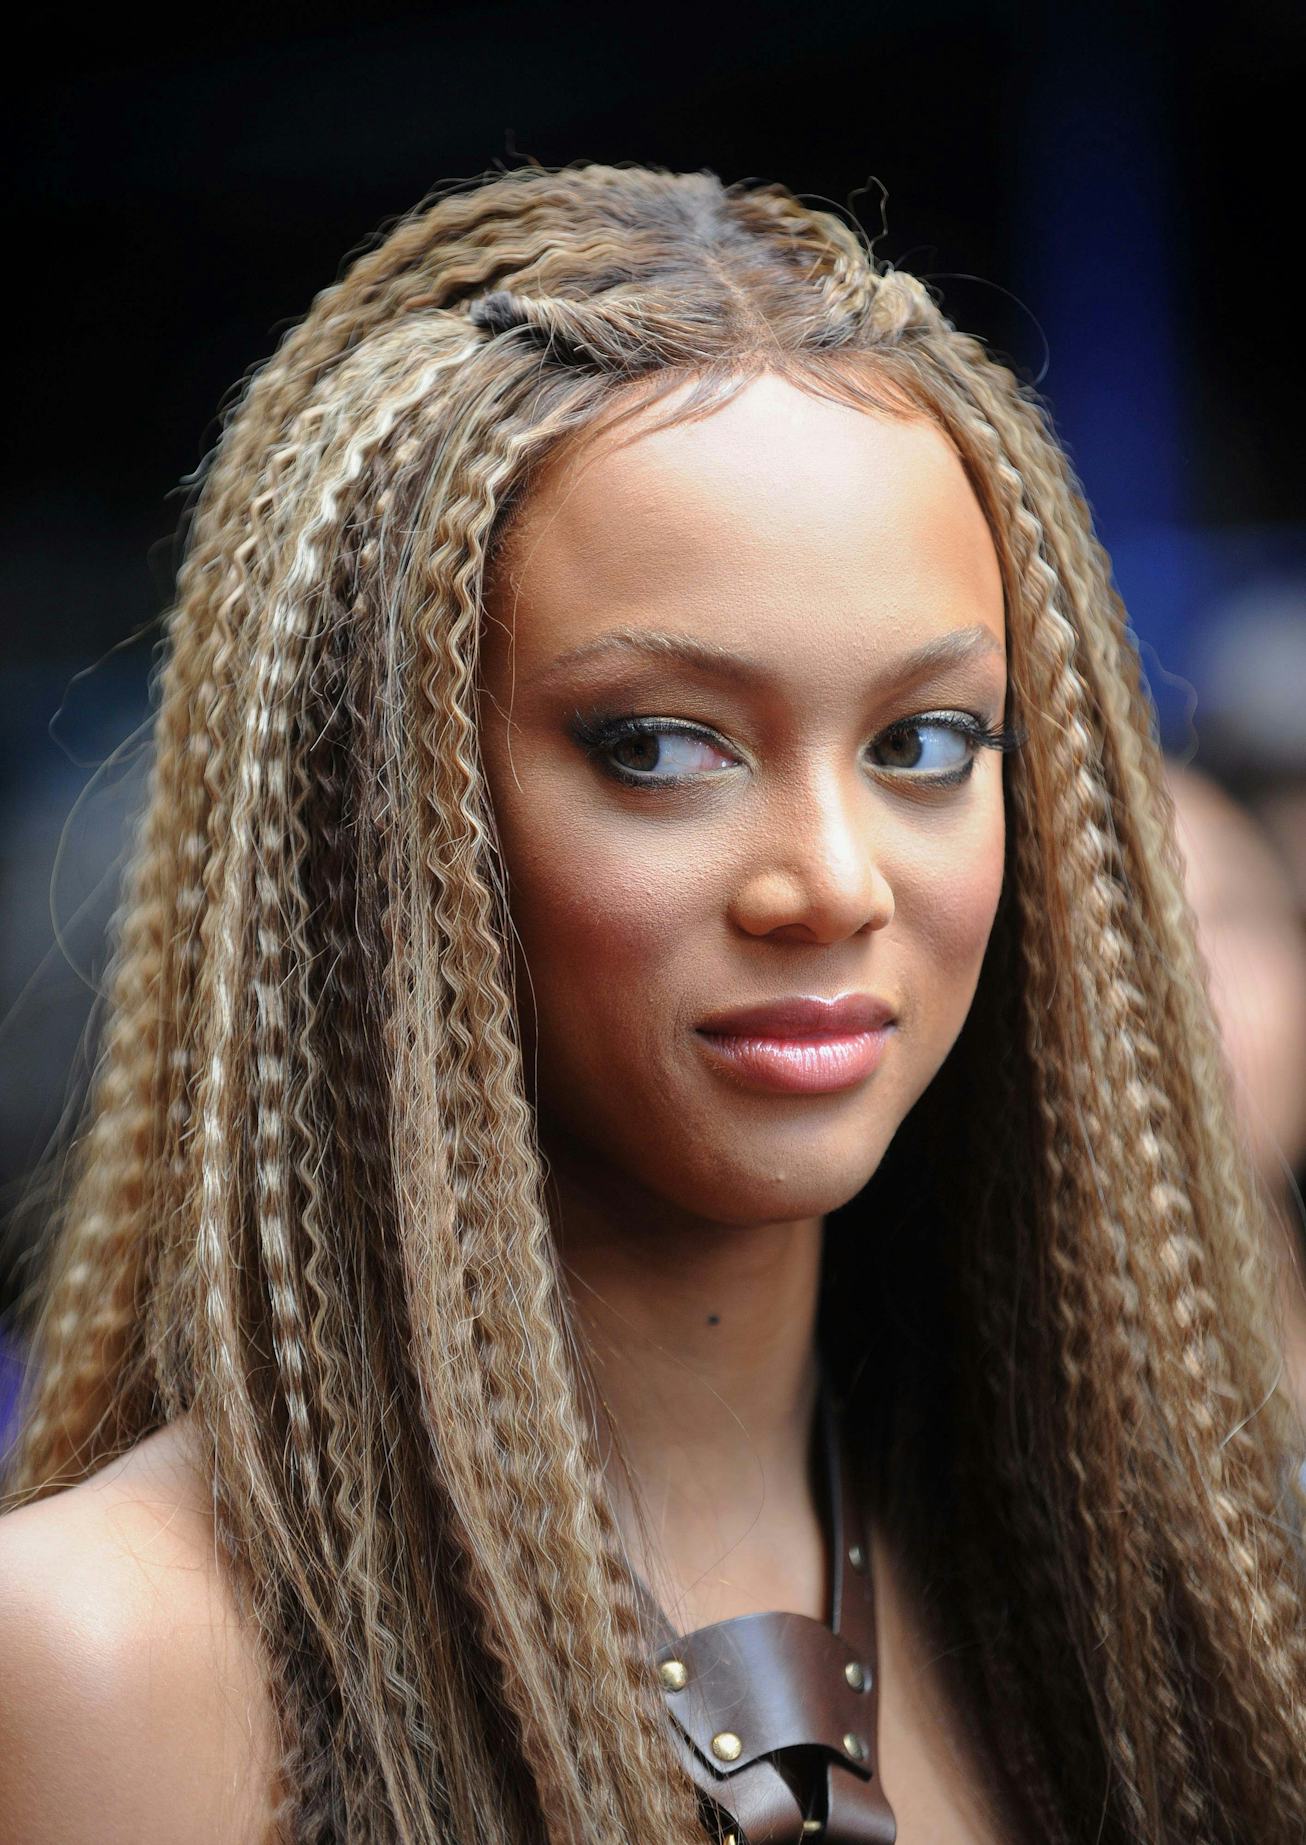 NEW YORK - AUGUST 12: Tyra Banks attends a taping of the "Tyra Banks Show" on West 26th Street on Au...